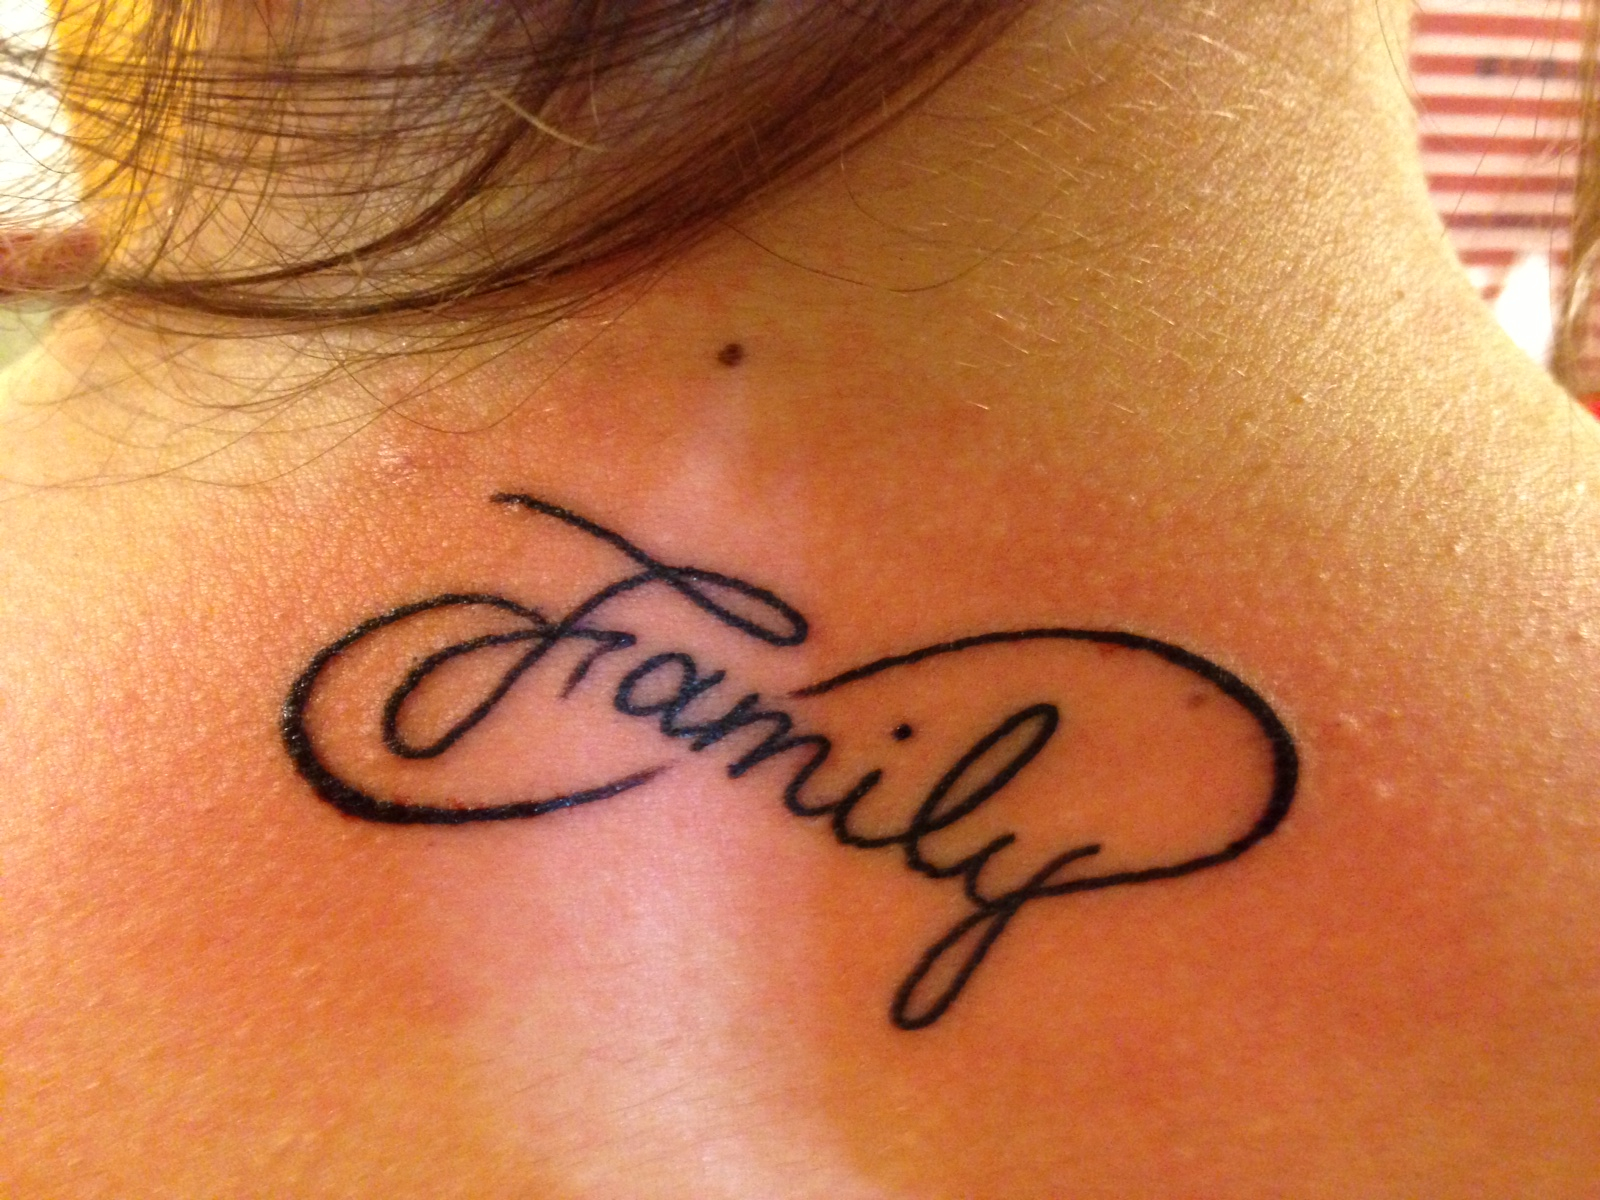 Family Tattoos Designs, Ideas and Meaning | Tattoos For You